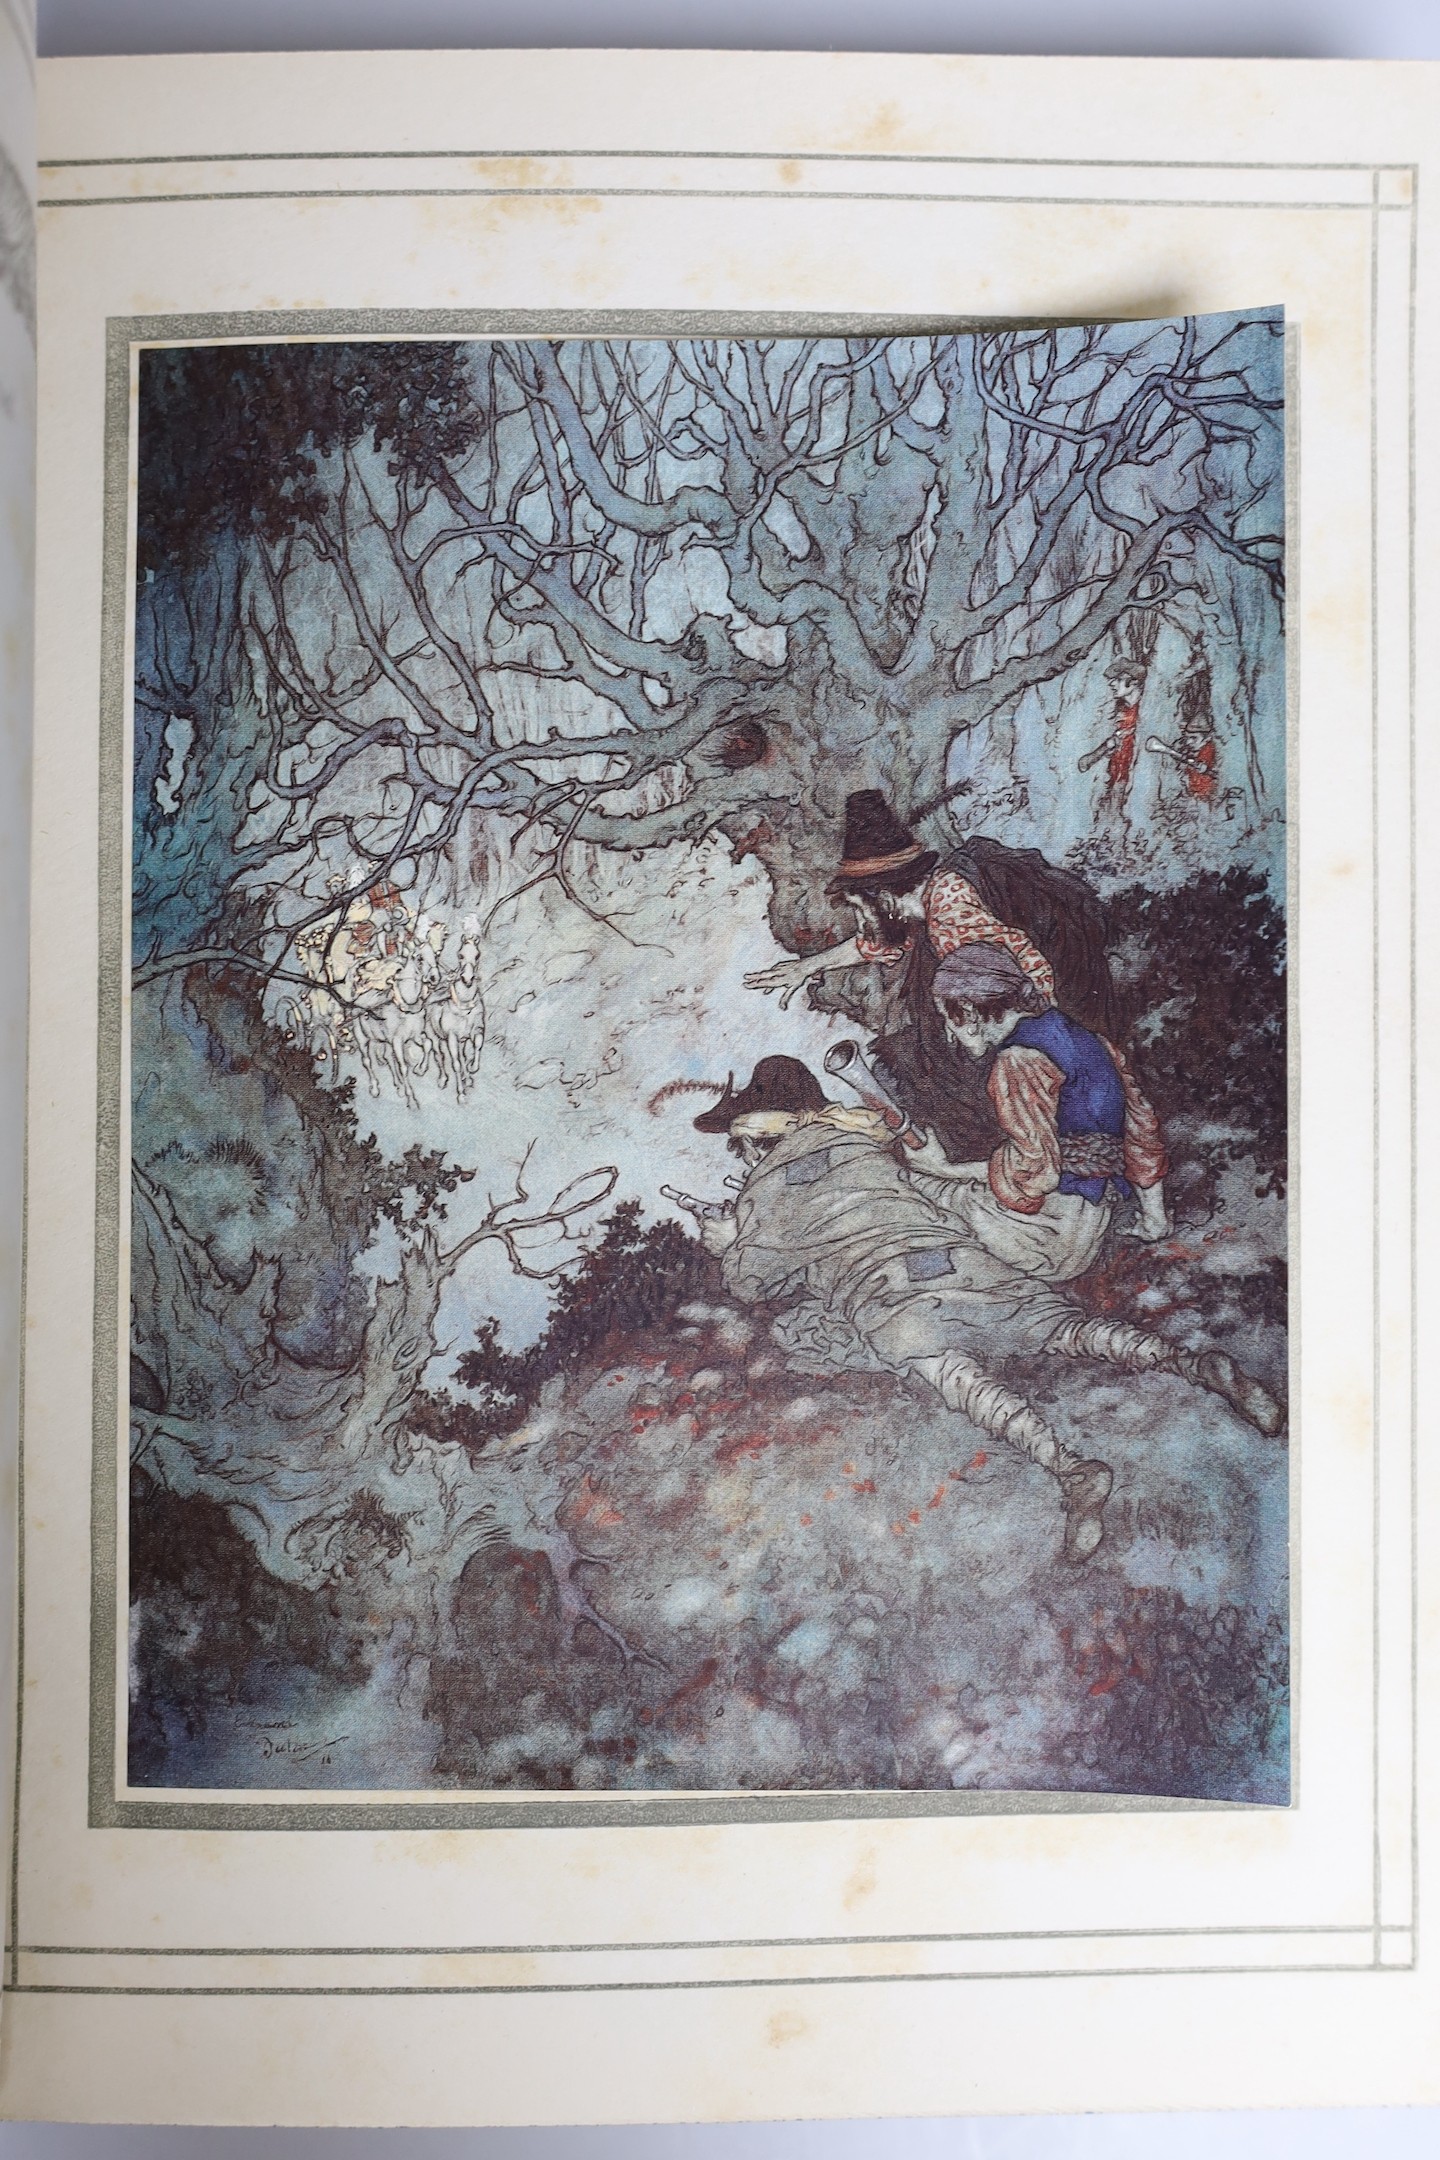 Dulac, Edmund (illustrator) - Stories from Hans Andersen, with 28 tipped-in colour plates, in later fine Art Deco brown morocco binding gilt with renewed end papers, Hodder and Stoughton, London, [1911]